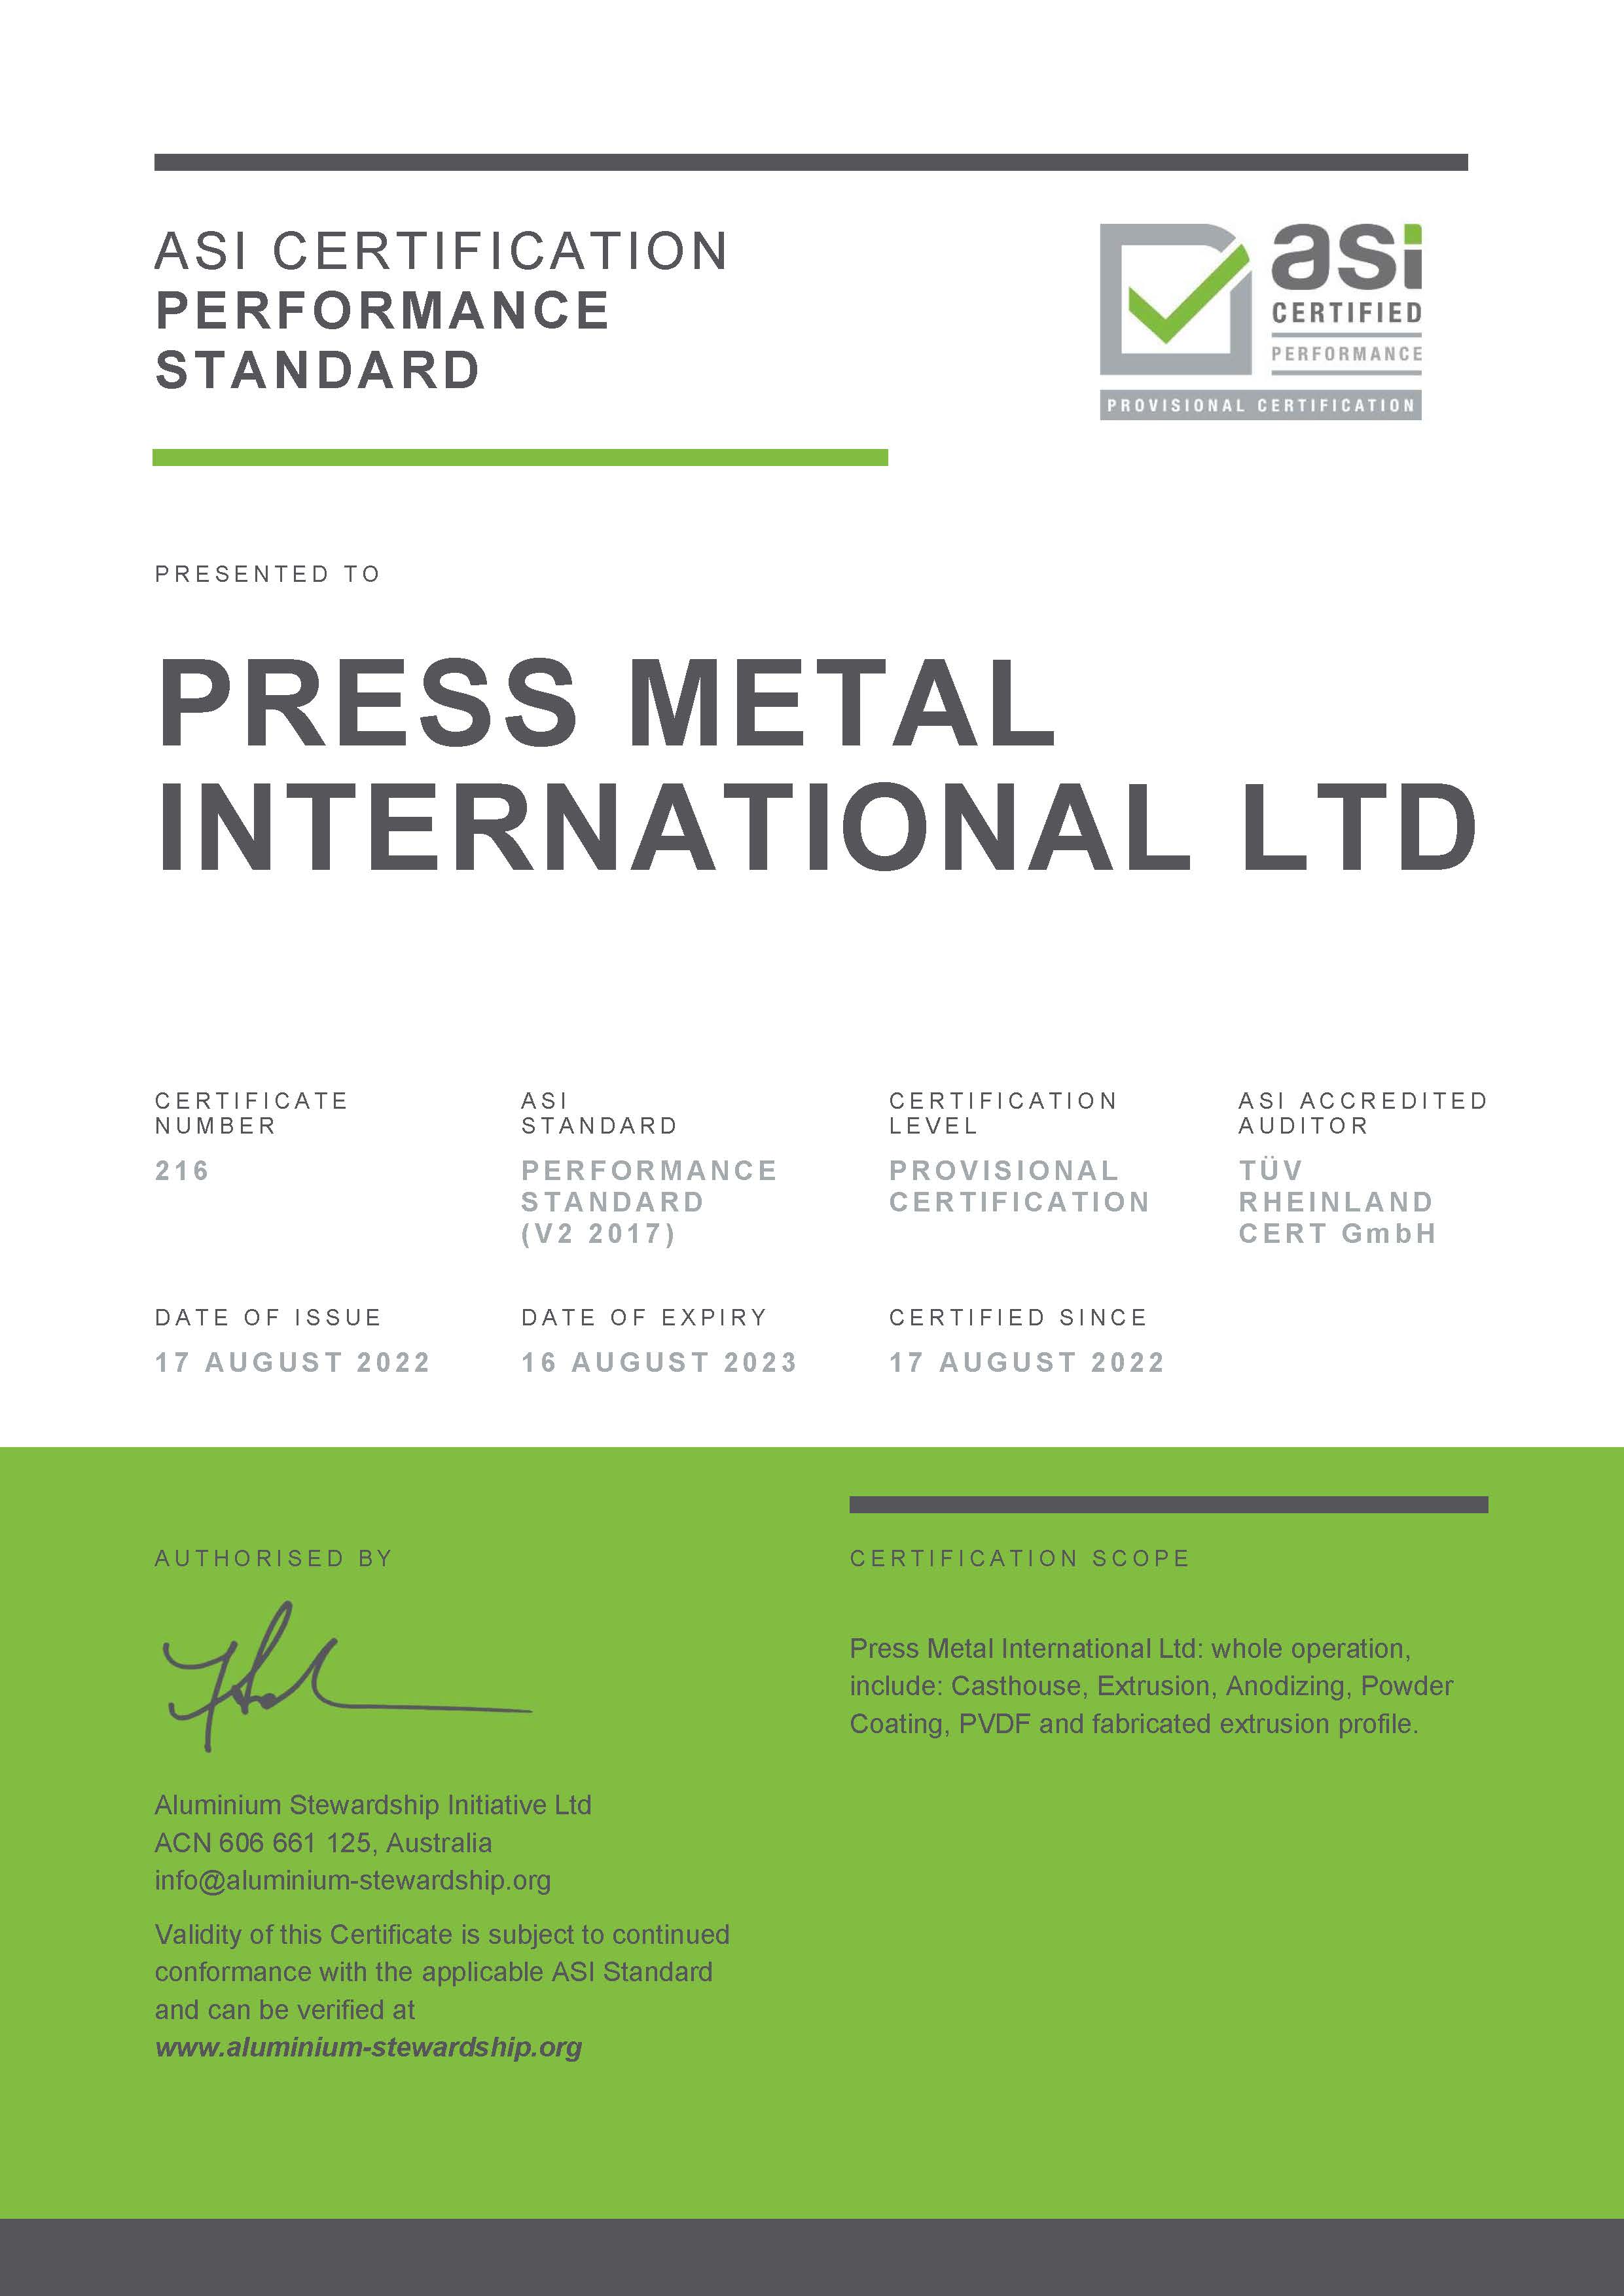 PMI has been certified against the ASI Performance Standard